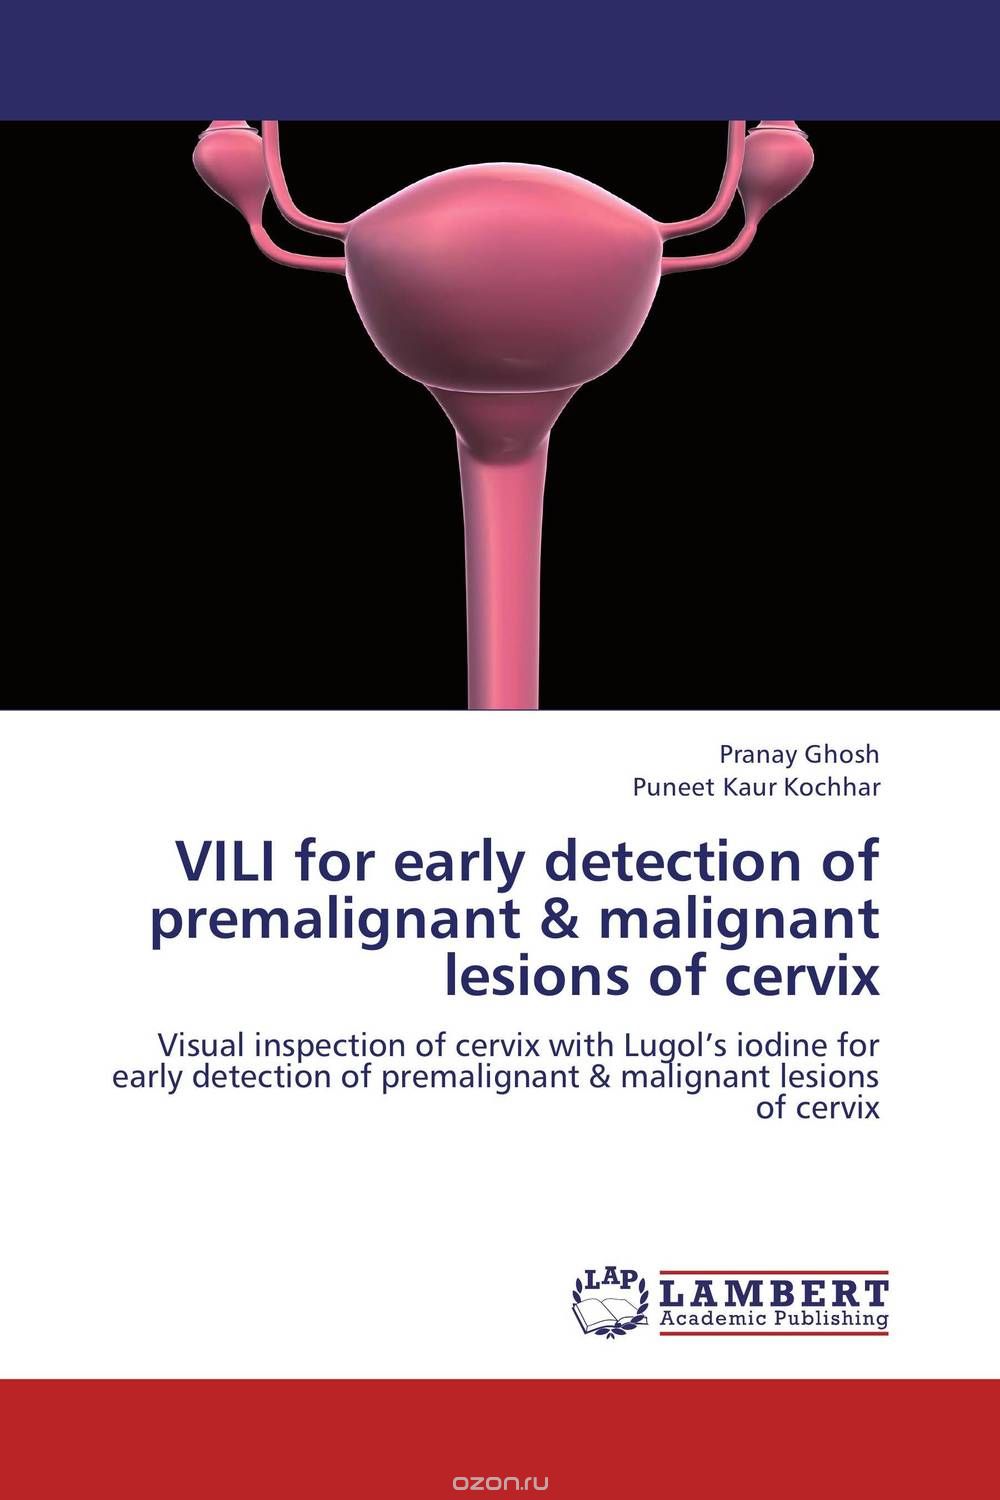 VILI for early detection of premalignant & malignant lesions of cervix